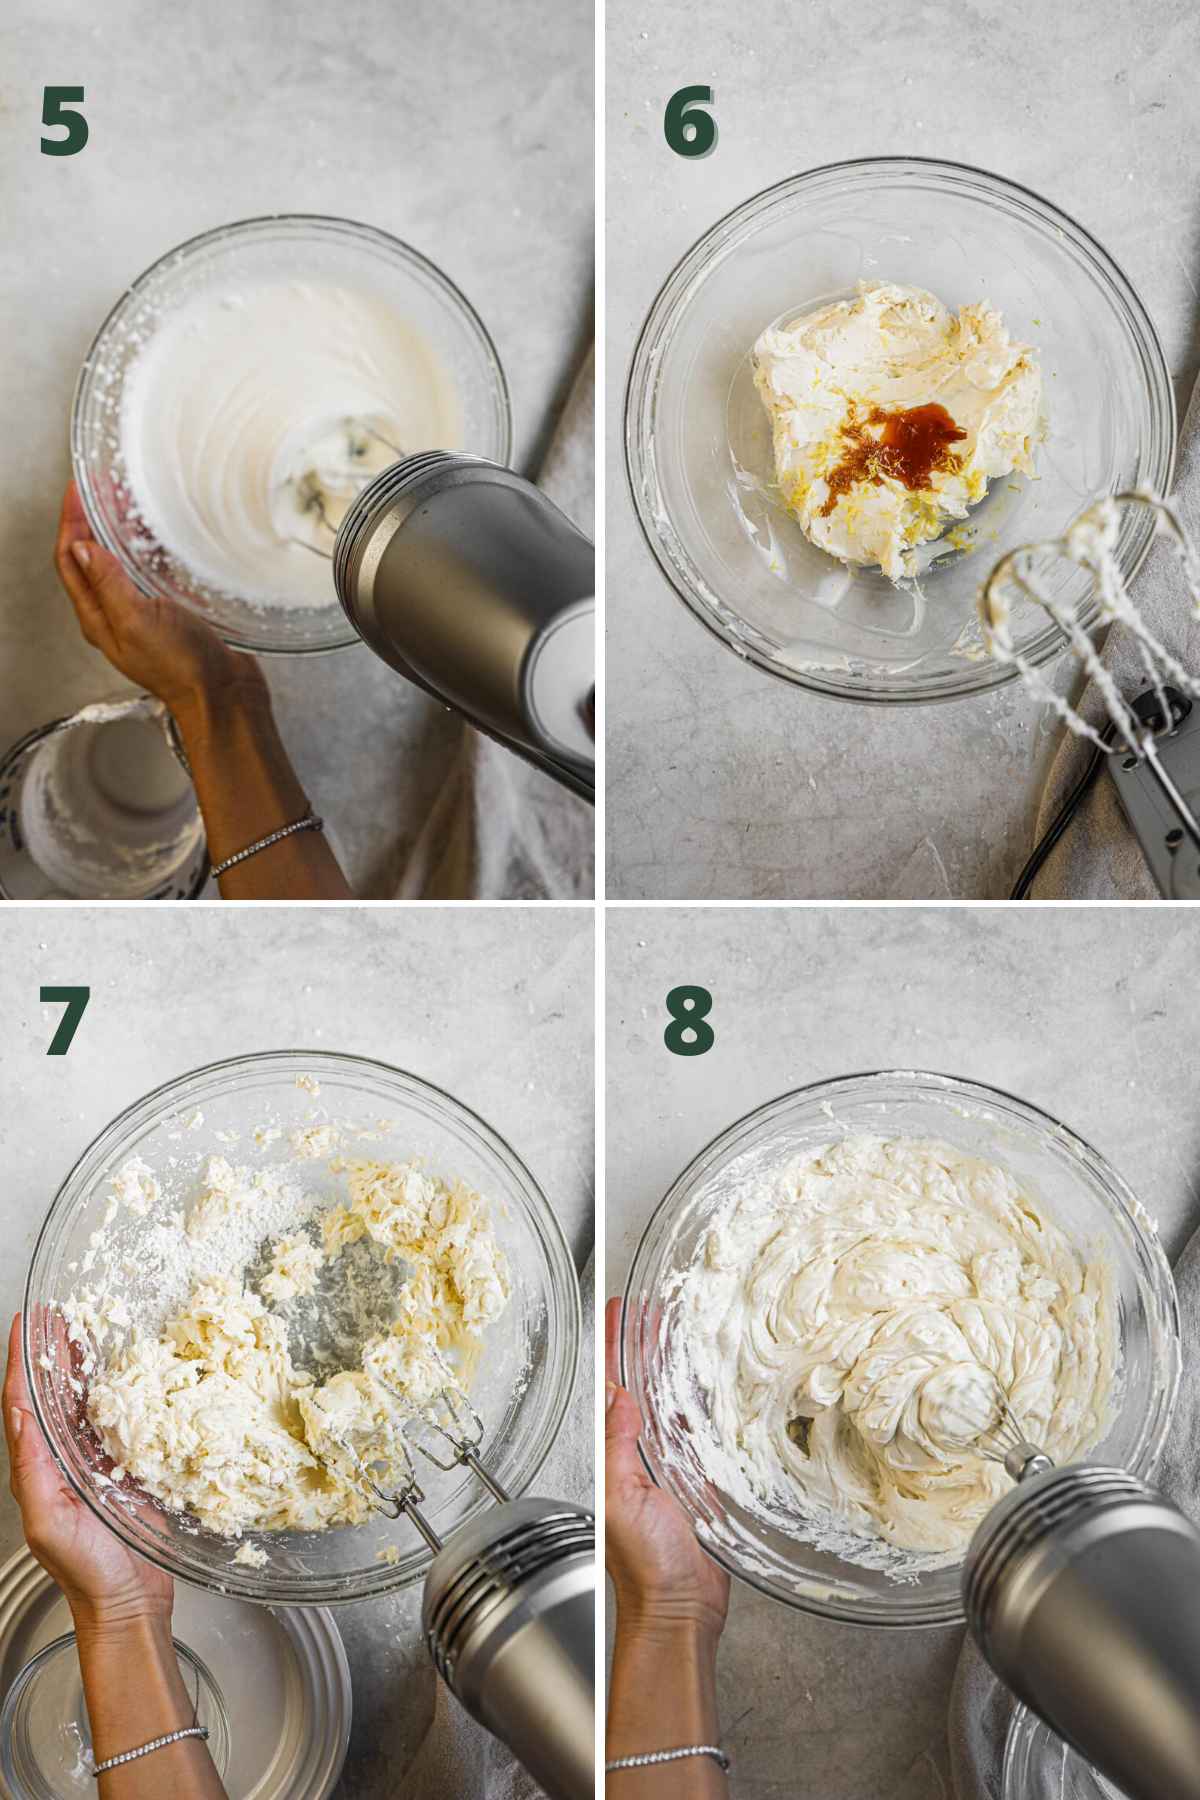 Steps to make no bake mini cheesecakes, whisk heavy whipping cream,; whisk cream cheese, vanilla, lemon zest, and powdered sugar; fold together.